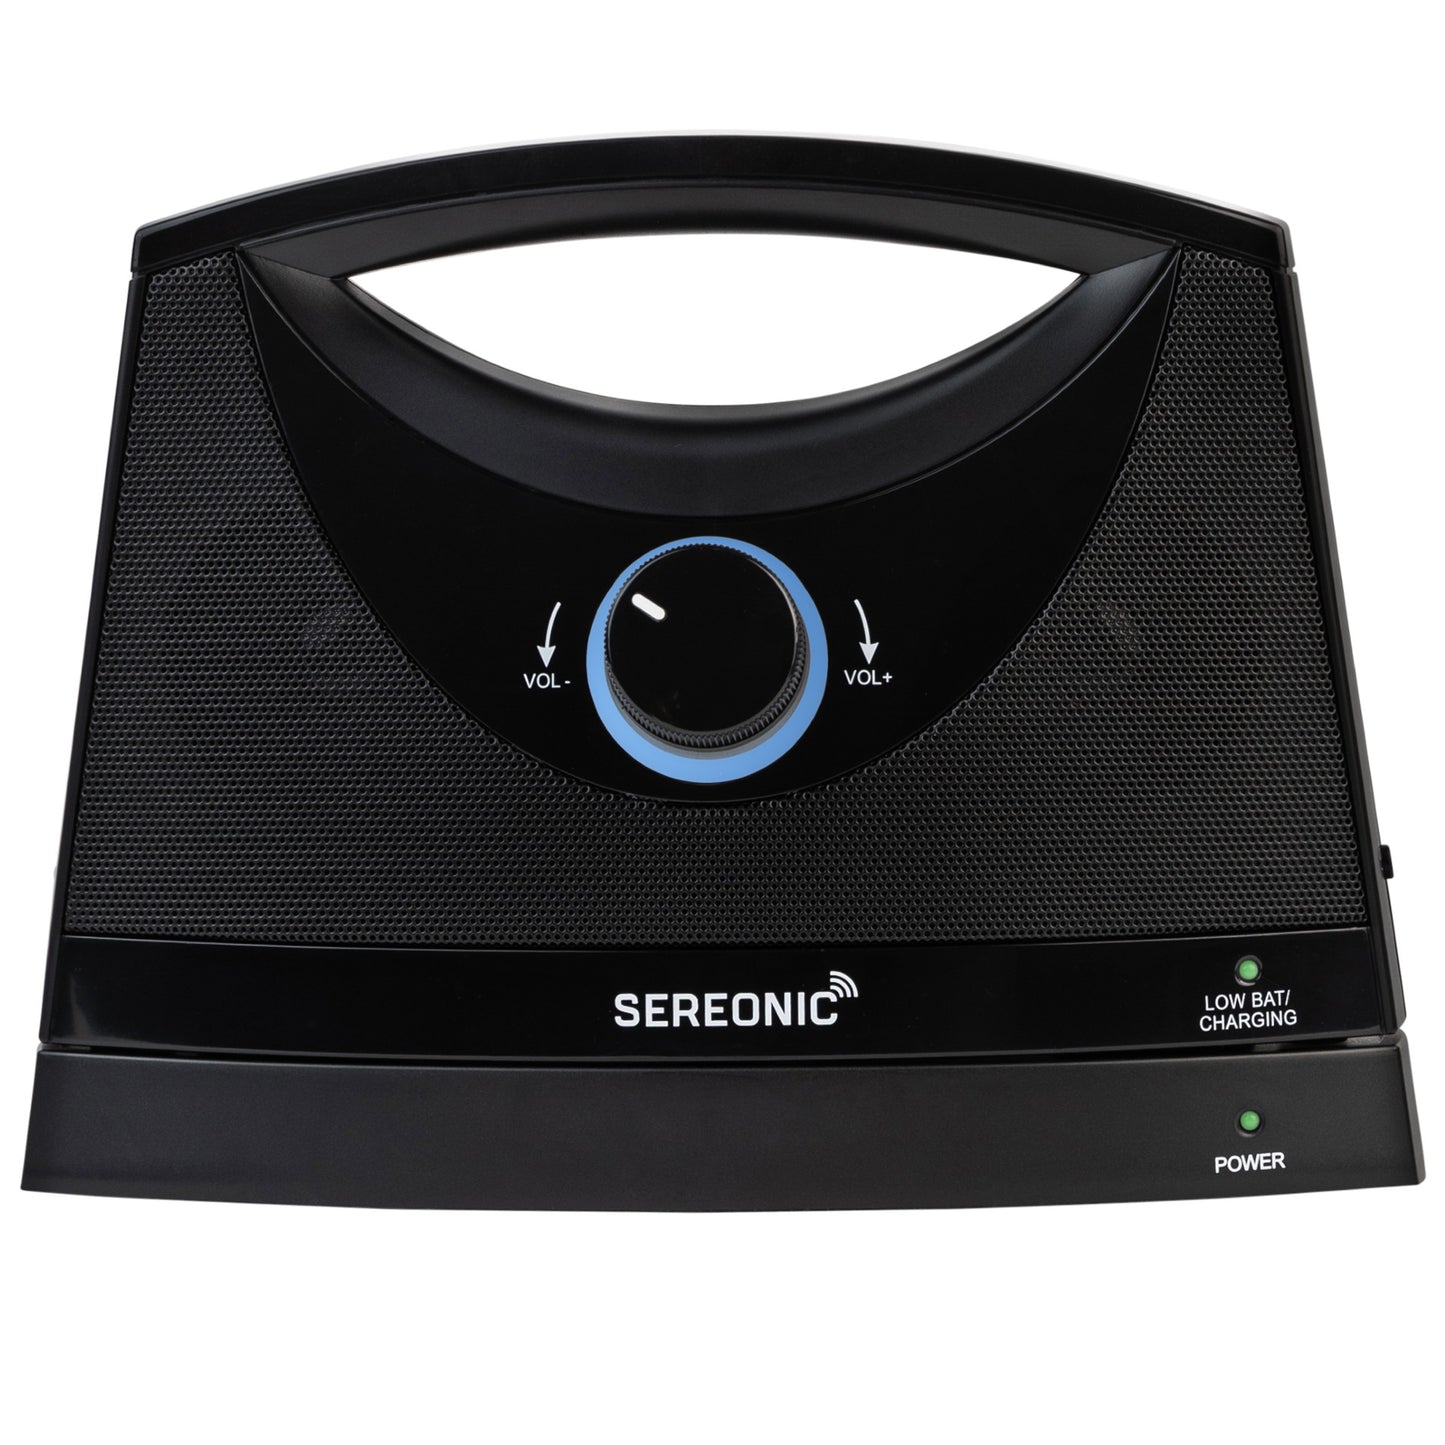 SEREONIC Portable Wireless TV Speakers for Smart TV - Ideal for TV Watching Without The Blaring Volume - Wireless Speakers for TV Designed for Hard of Hearing, Elderly, and Seniors - 100ft Range